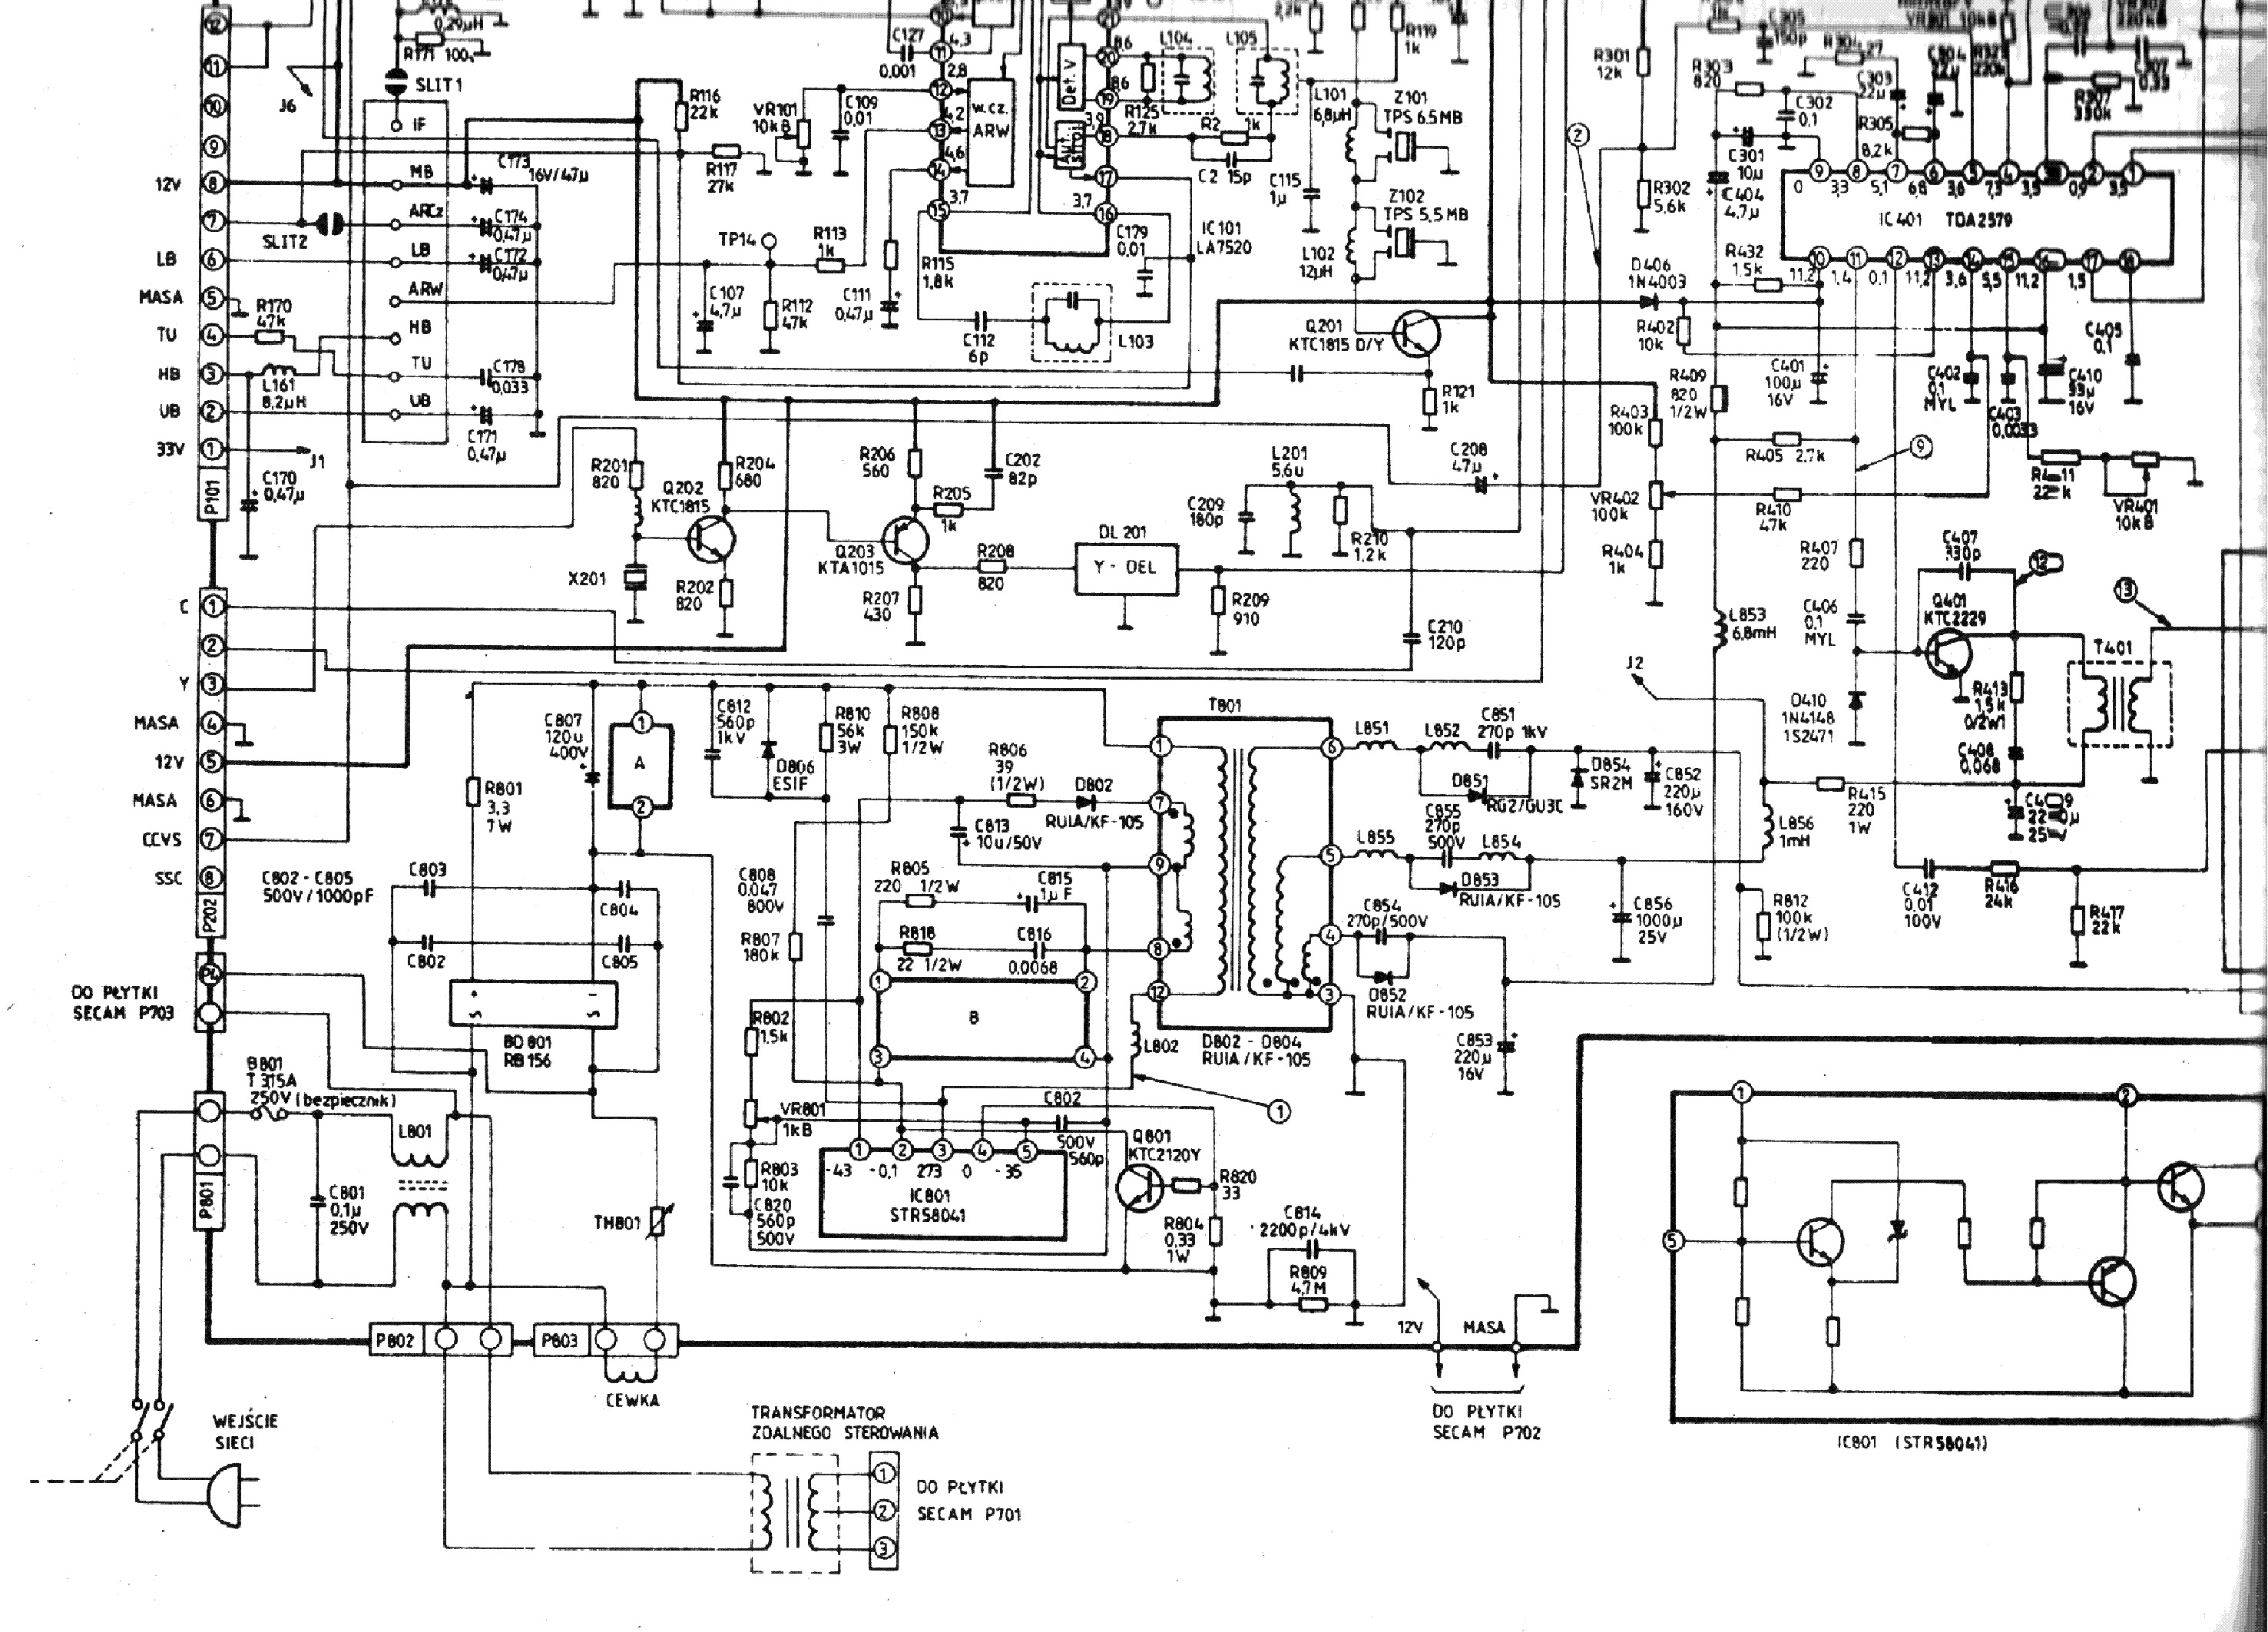 LG CHASSIS-PC-05X2 service manual (1st page)